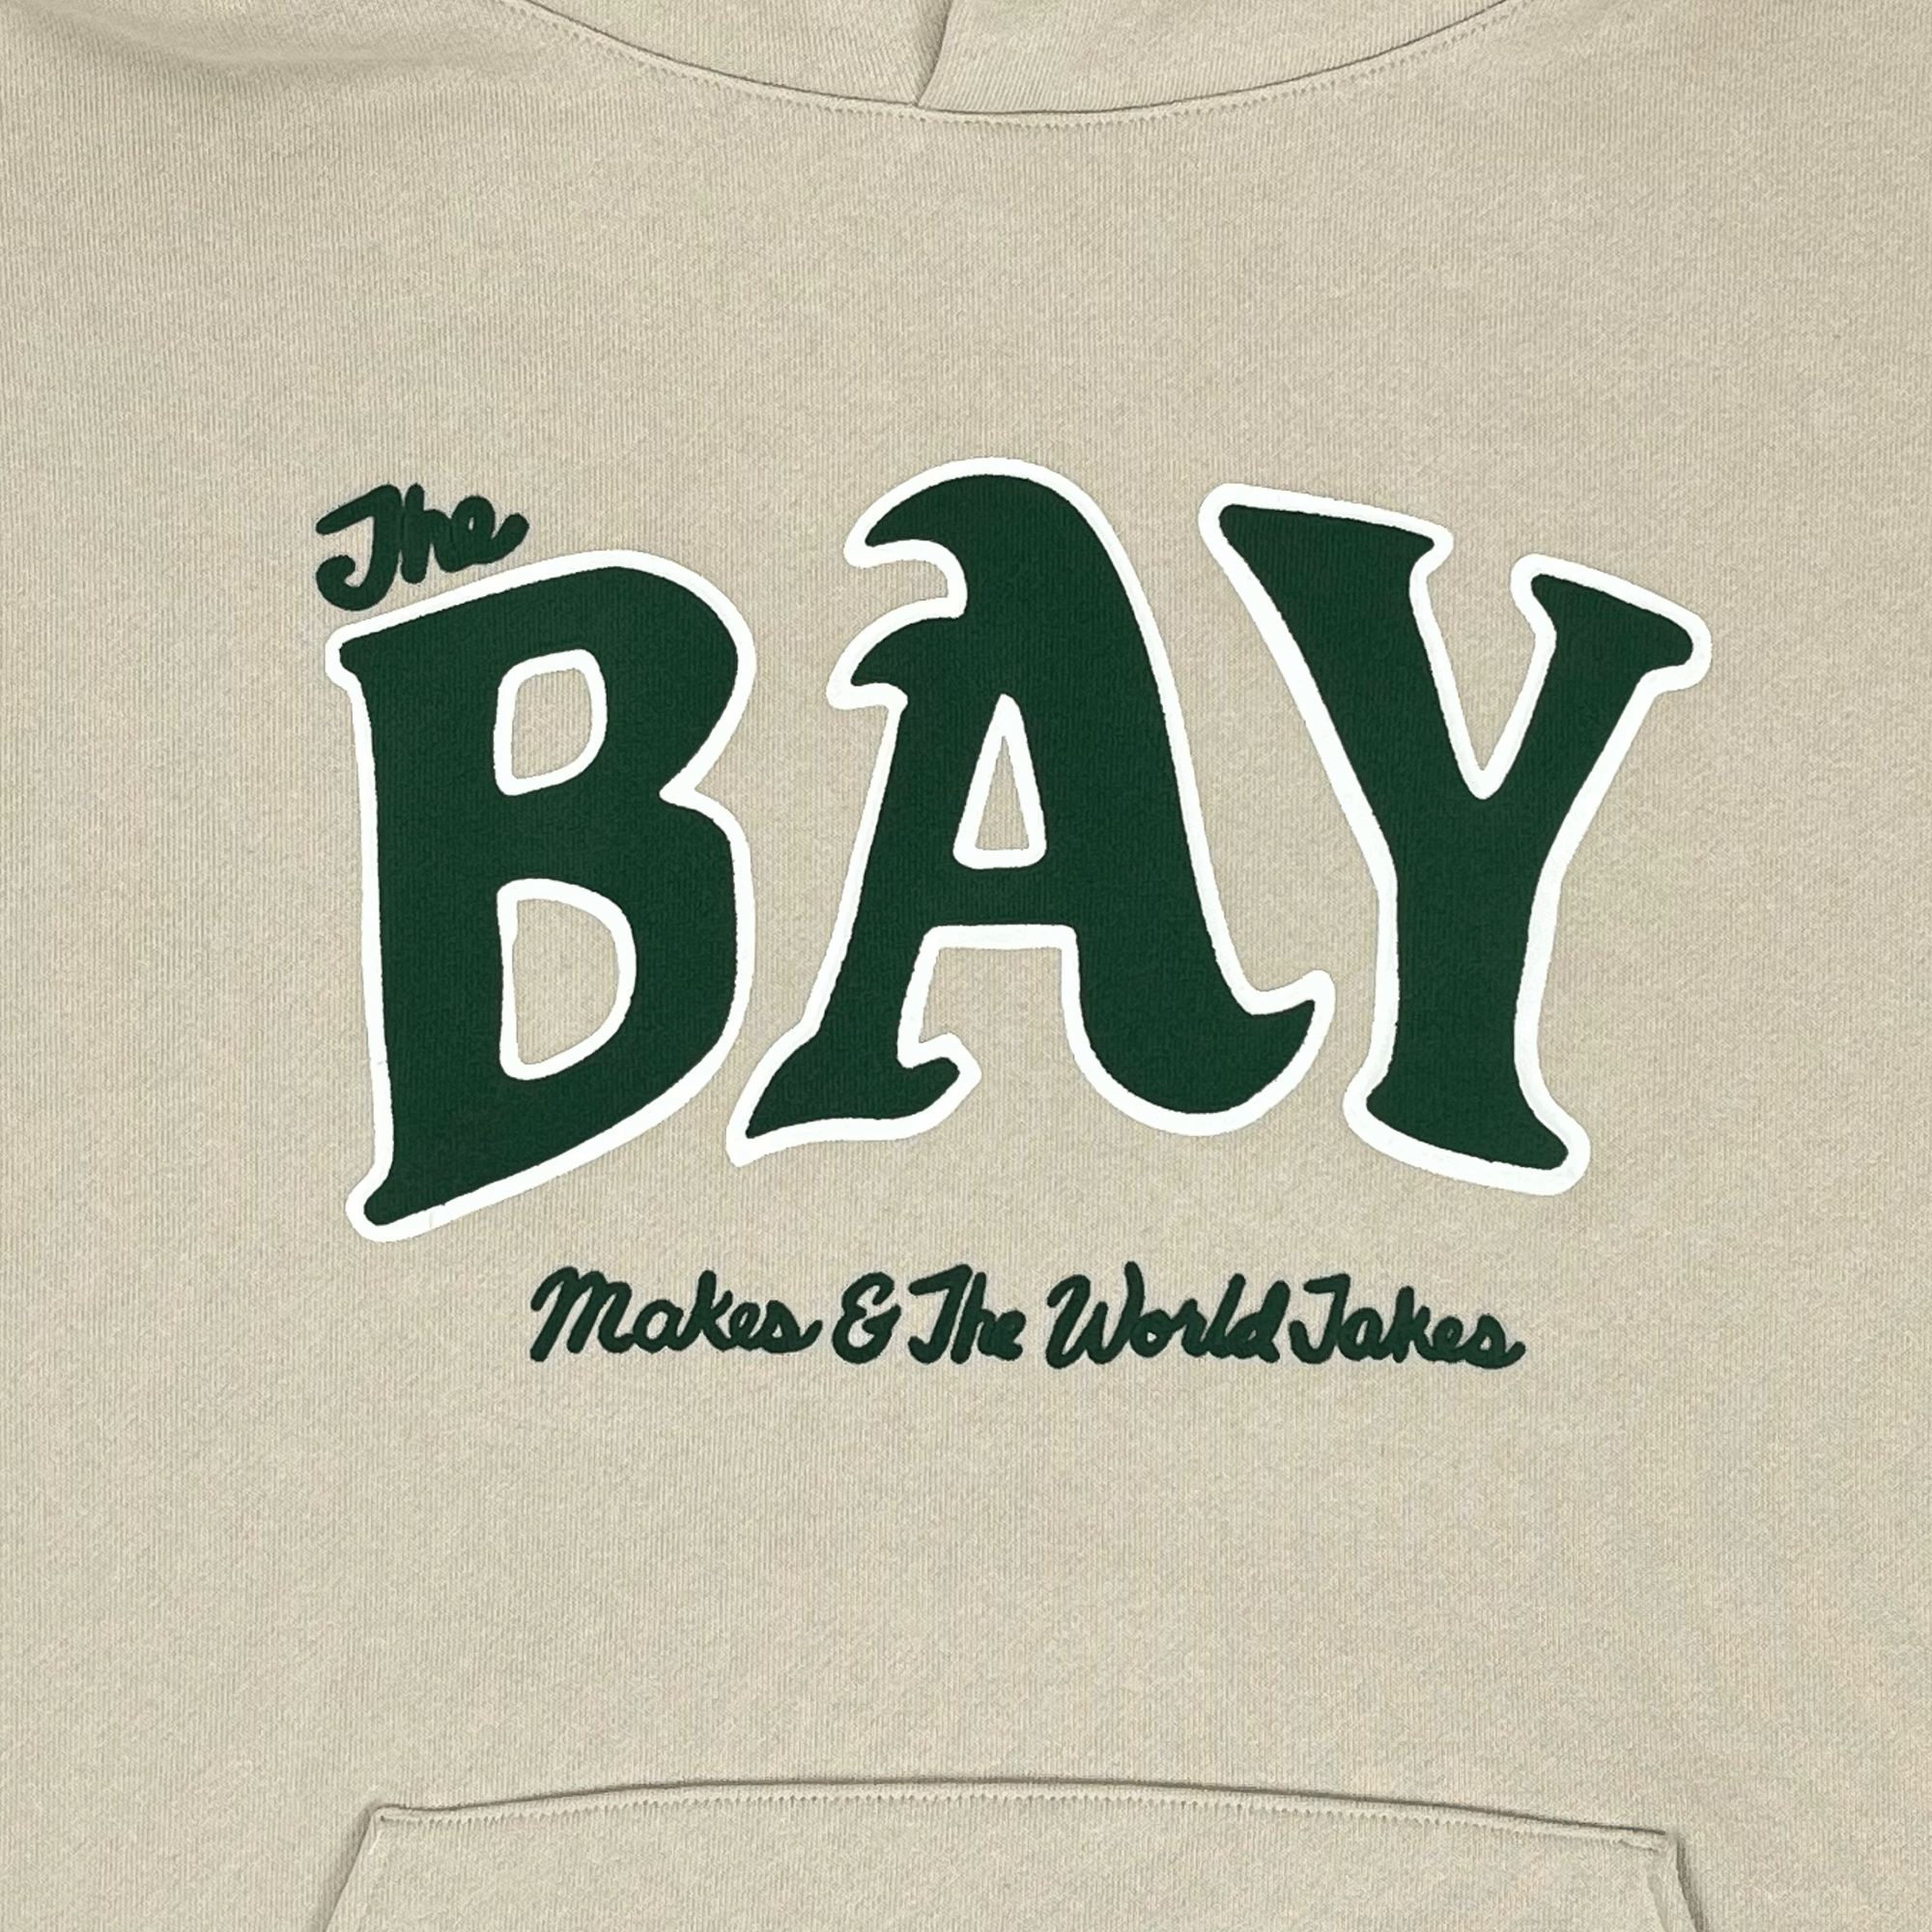 Close-up of a large green The Bay Makes, The World Takes logo on the front chest of an ivory pullover hoodie sweatshirt.